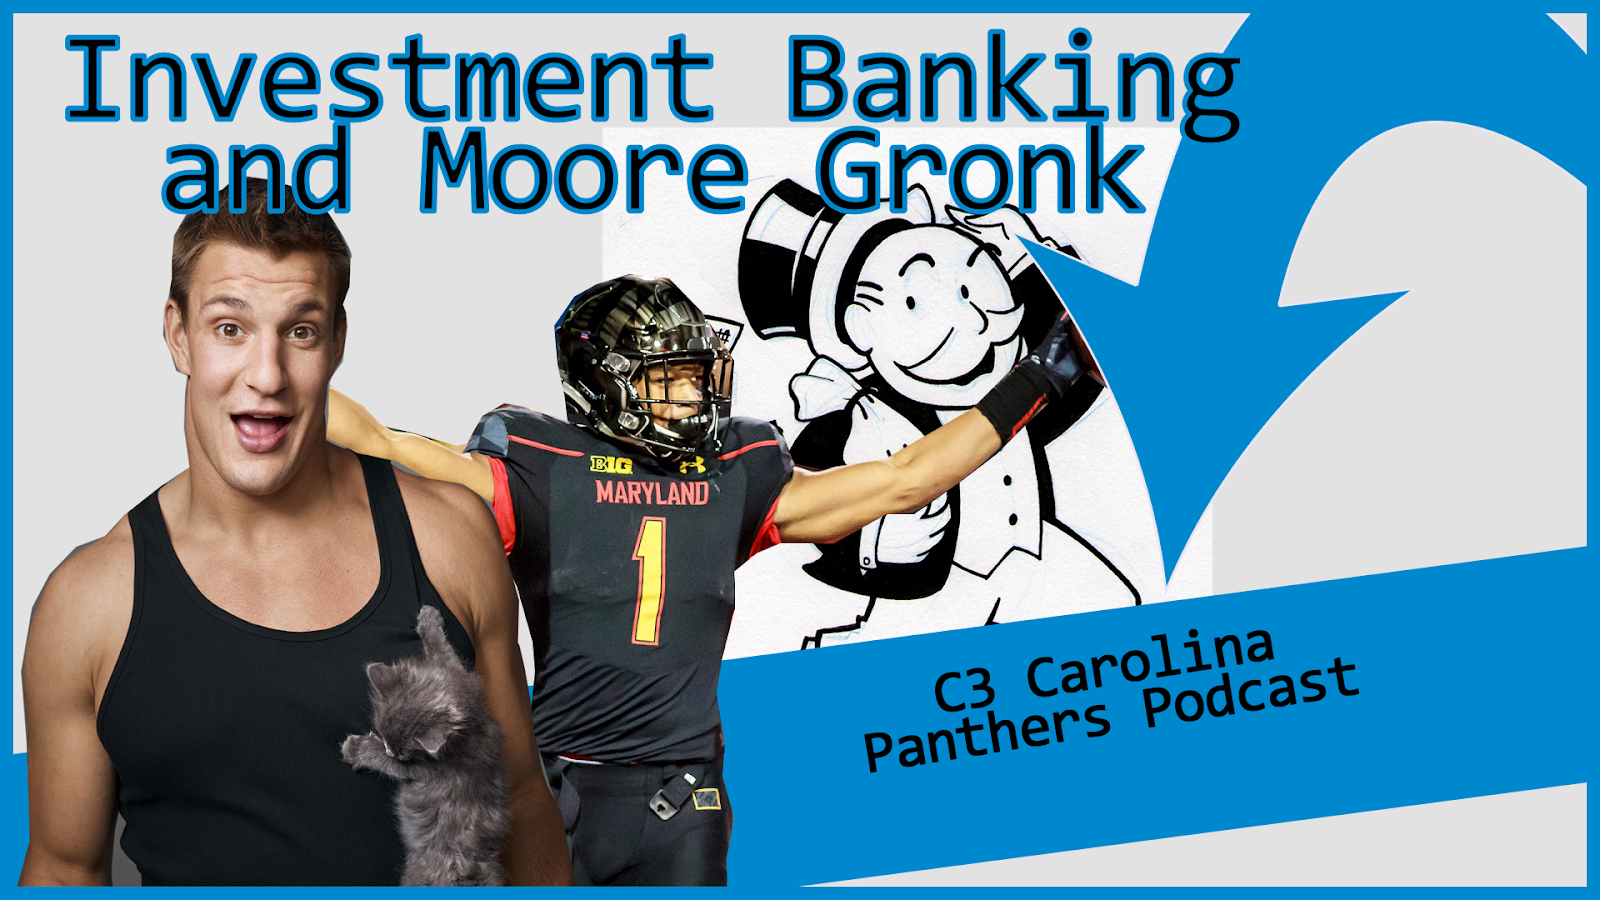 Investment Banking and Moore Gronk (C3 Carolina Panthers Ep. 